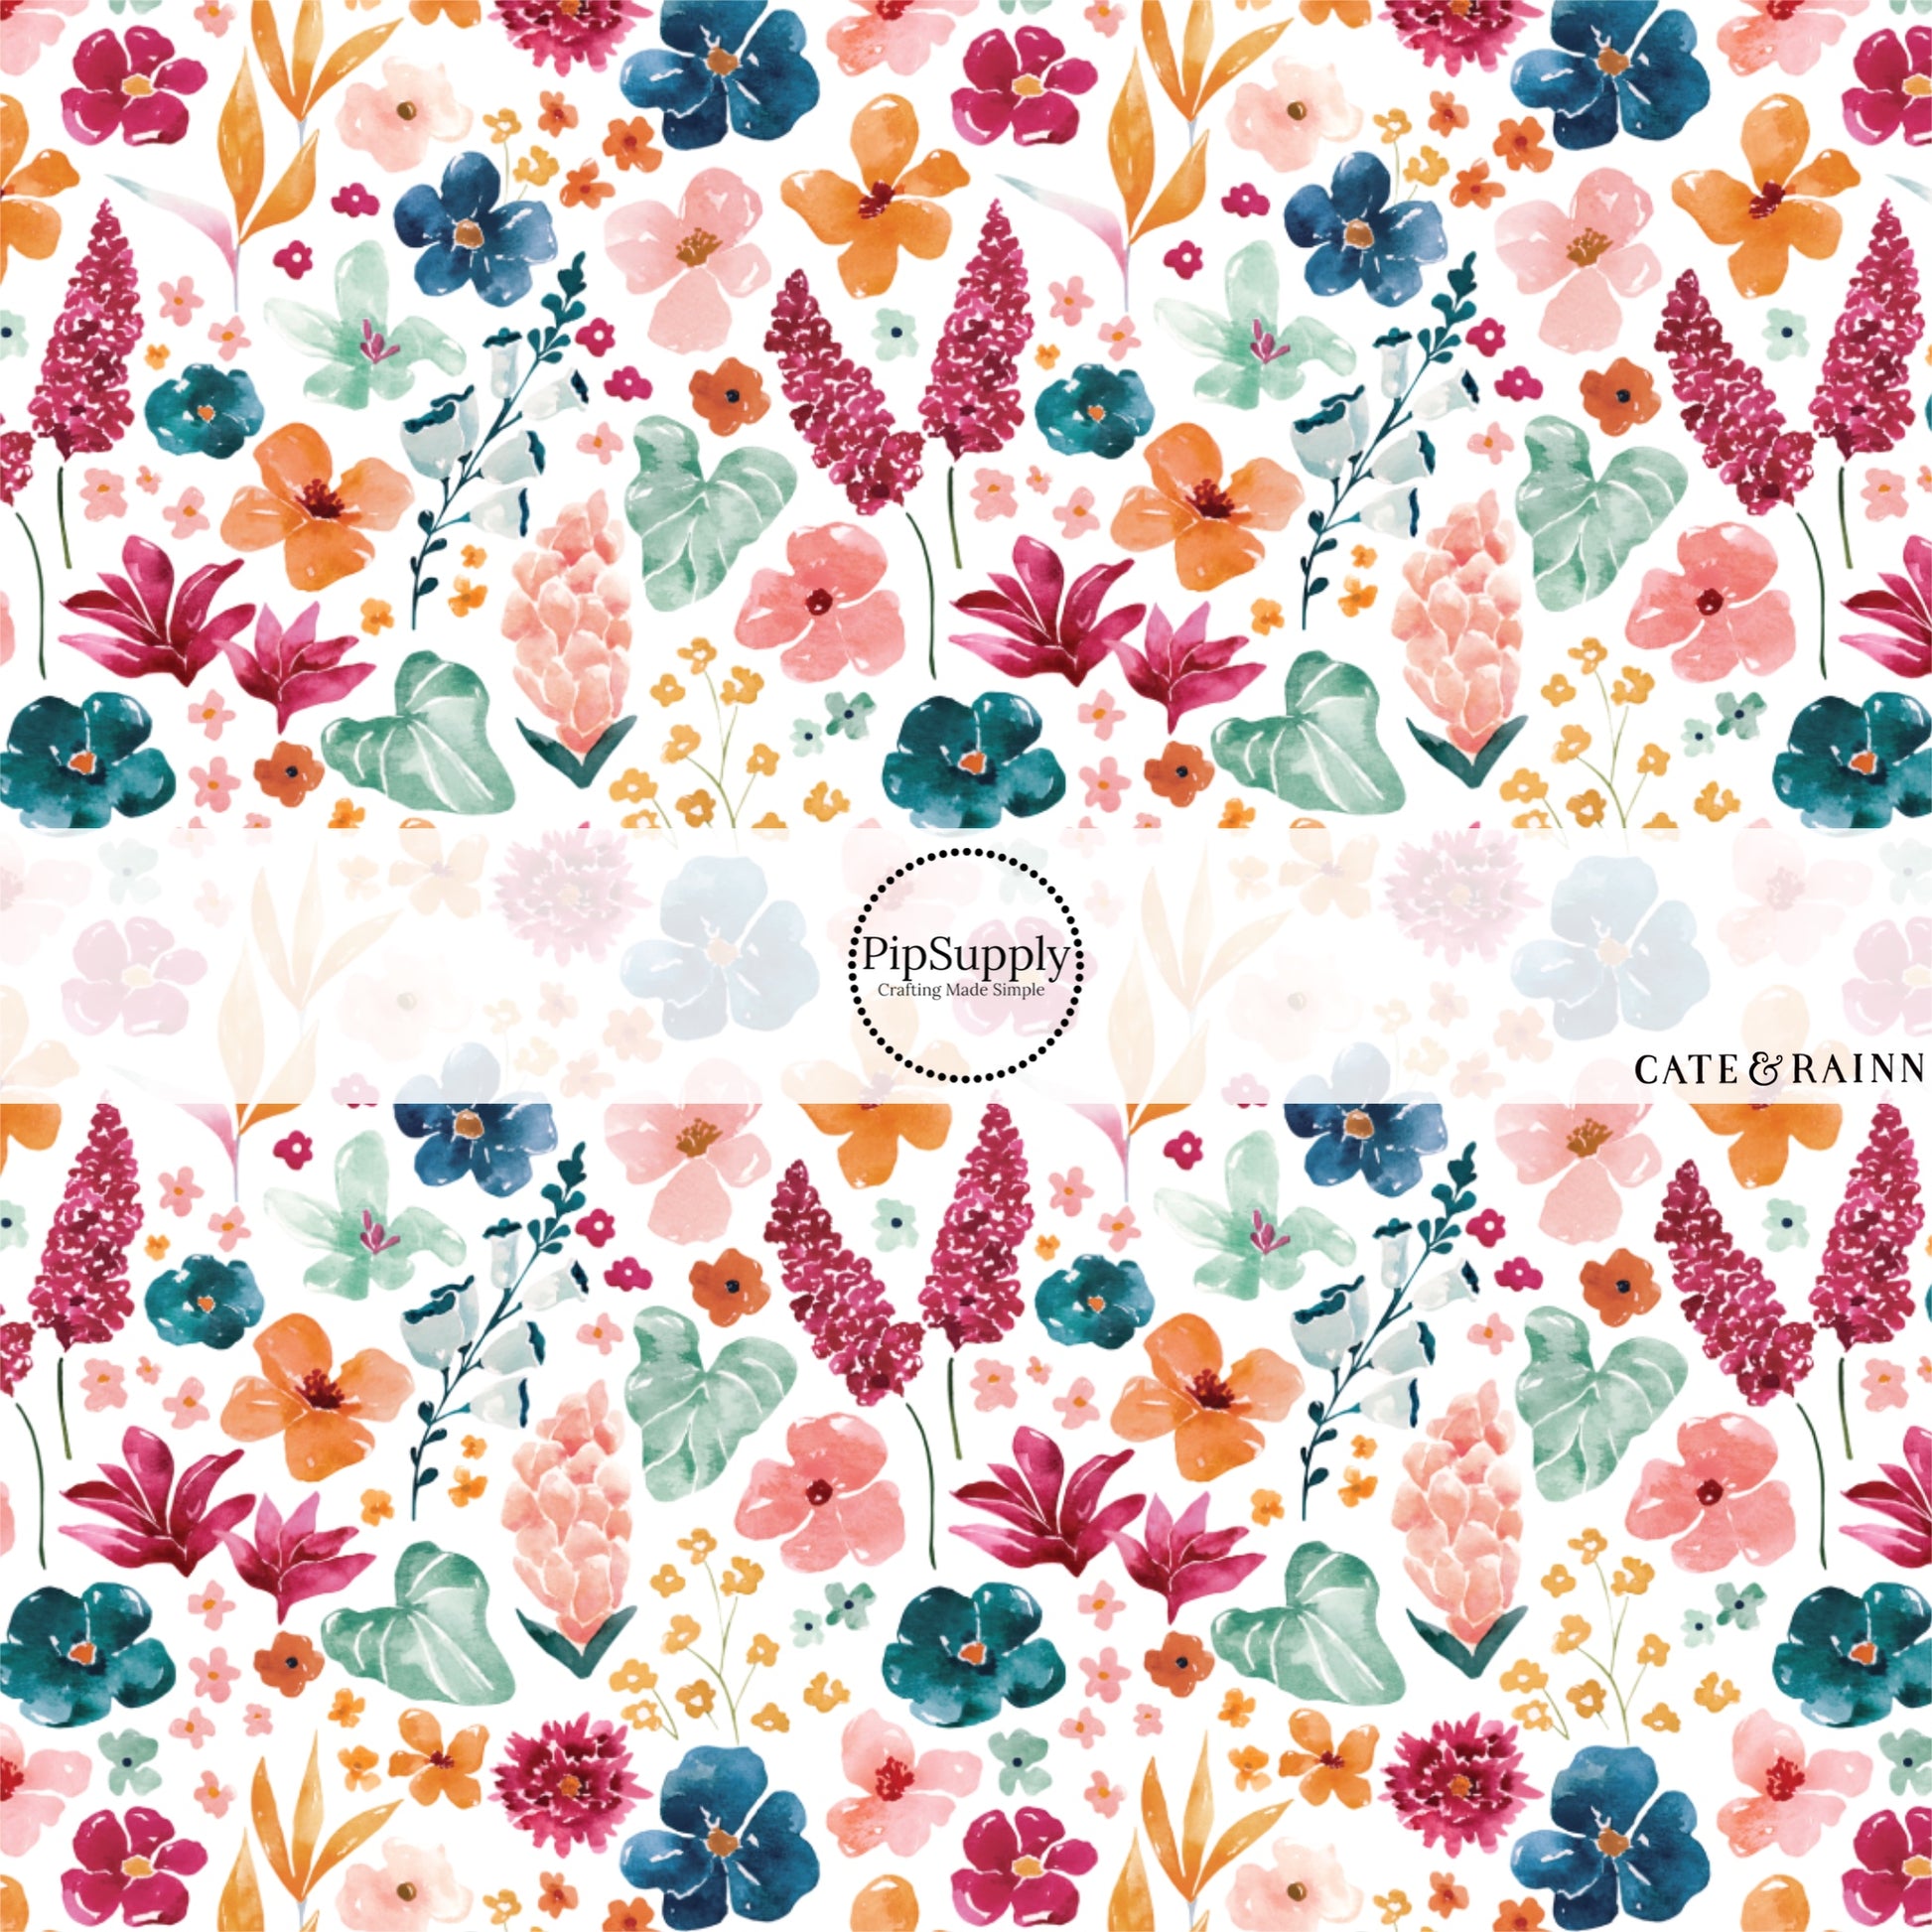 These jungle pattern fabric by the yard features tropical botanical flowers. This fun fabric can be used for all your sewing and crafting needs!